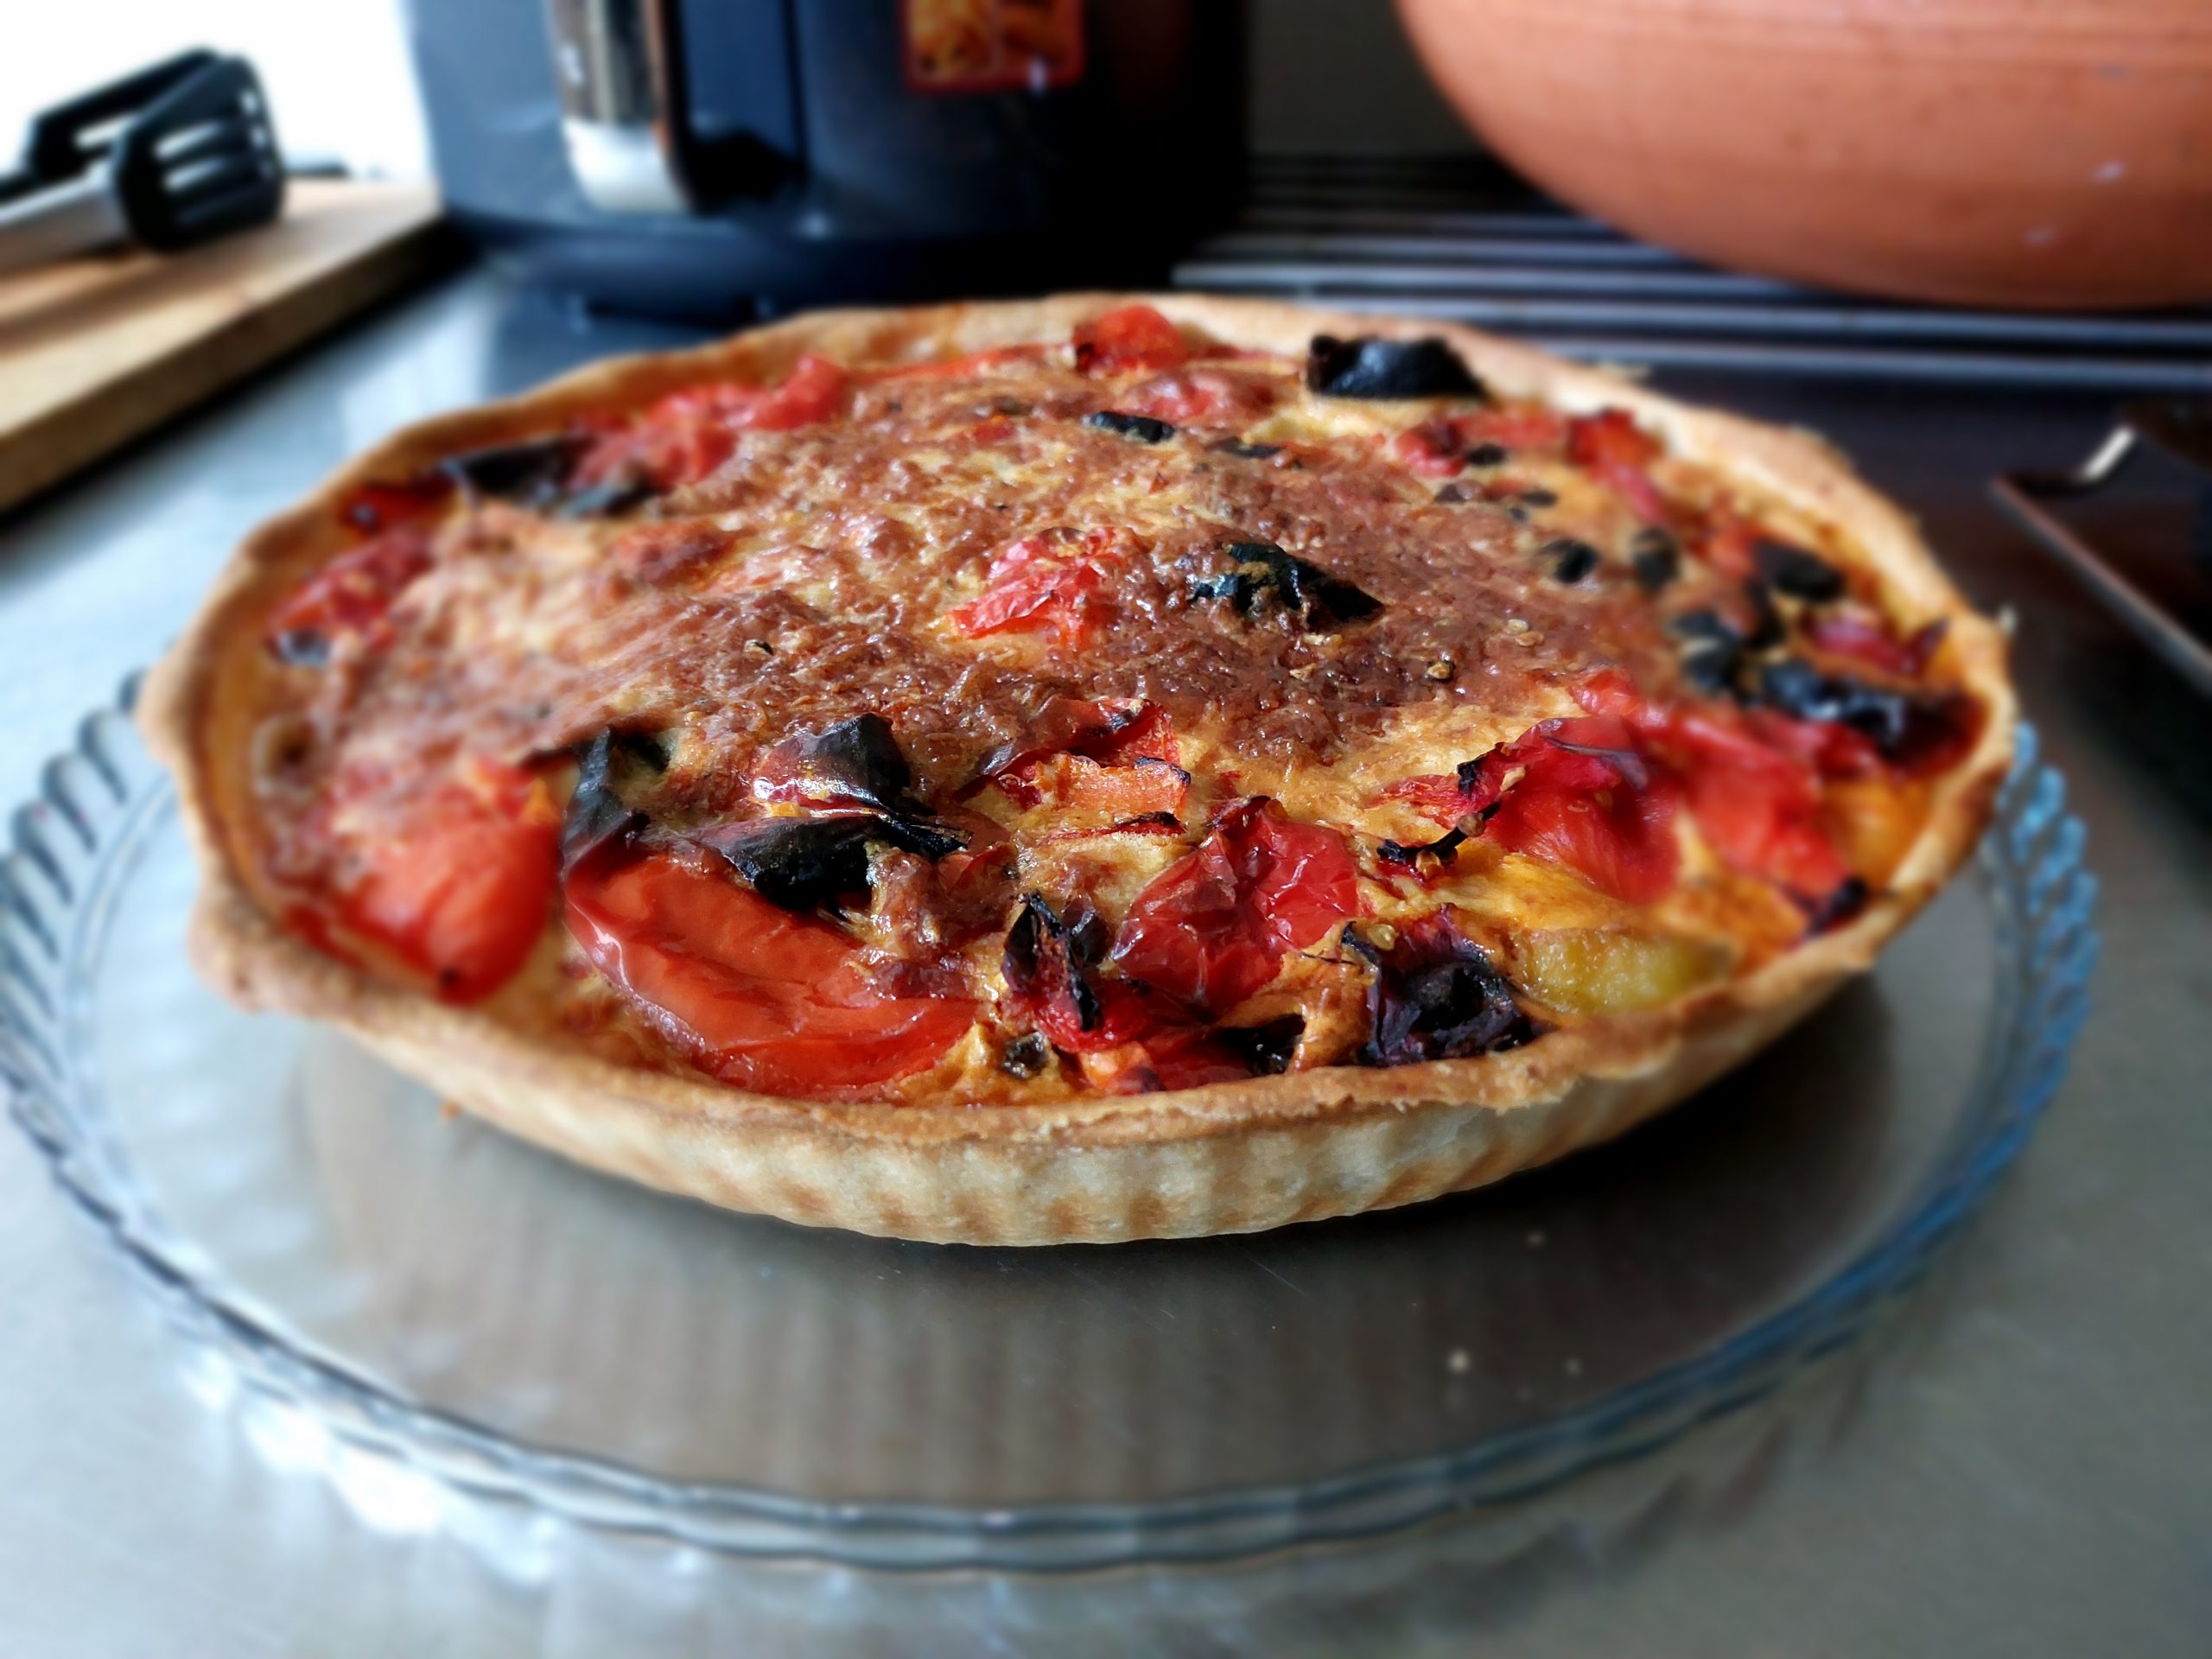 Quiche with roasted peppers, tomatoes and goat cheese